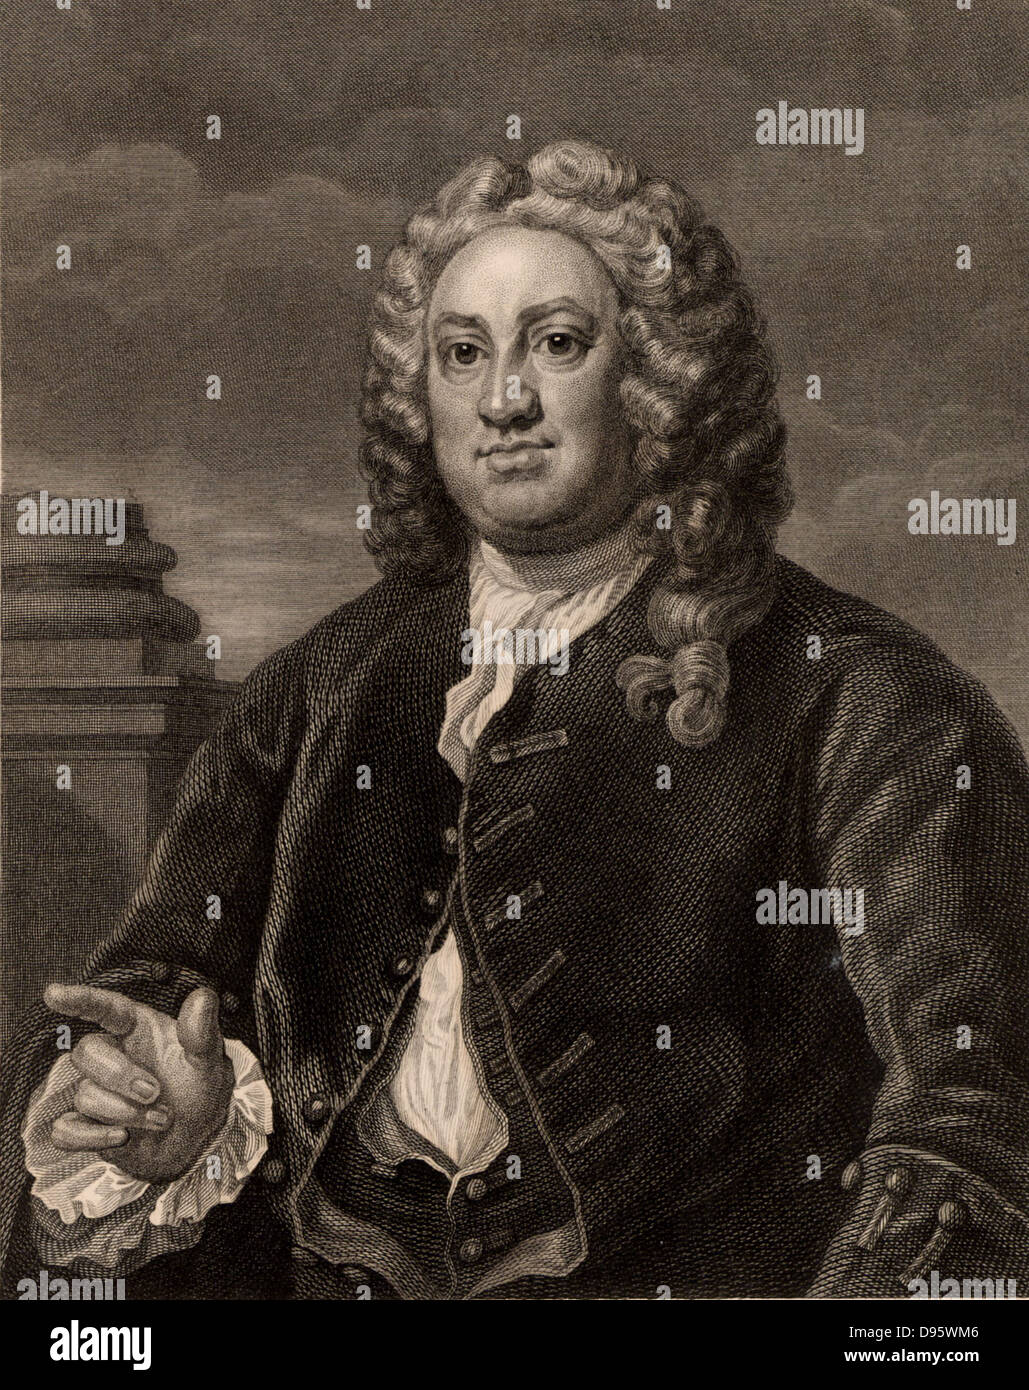 Martin Folkes (1690-1754)  English antiquary, born in London.  President of the Royal Society (1741-1753).  President of the Society of Antiquaries (1749-1754).  Engraving after the portrait by William Hogarth. Stock Photo